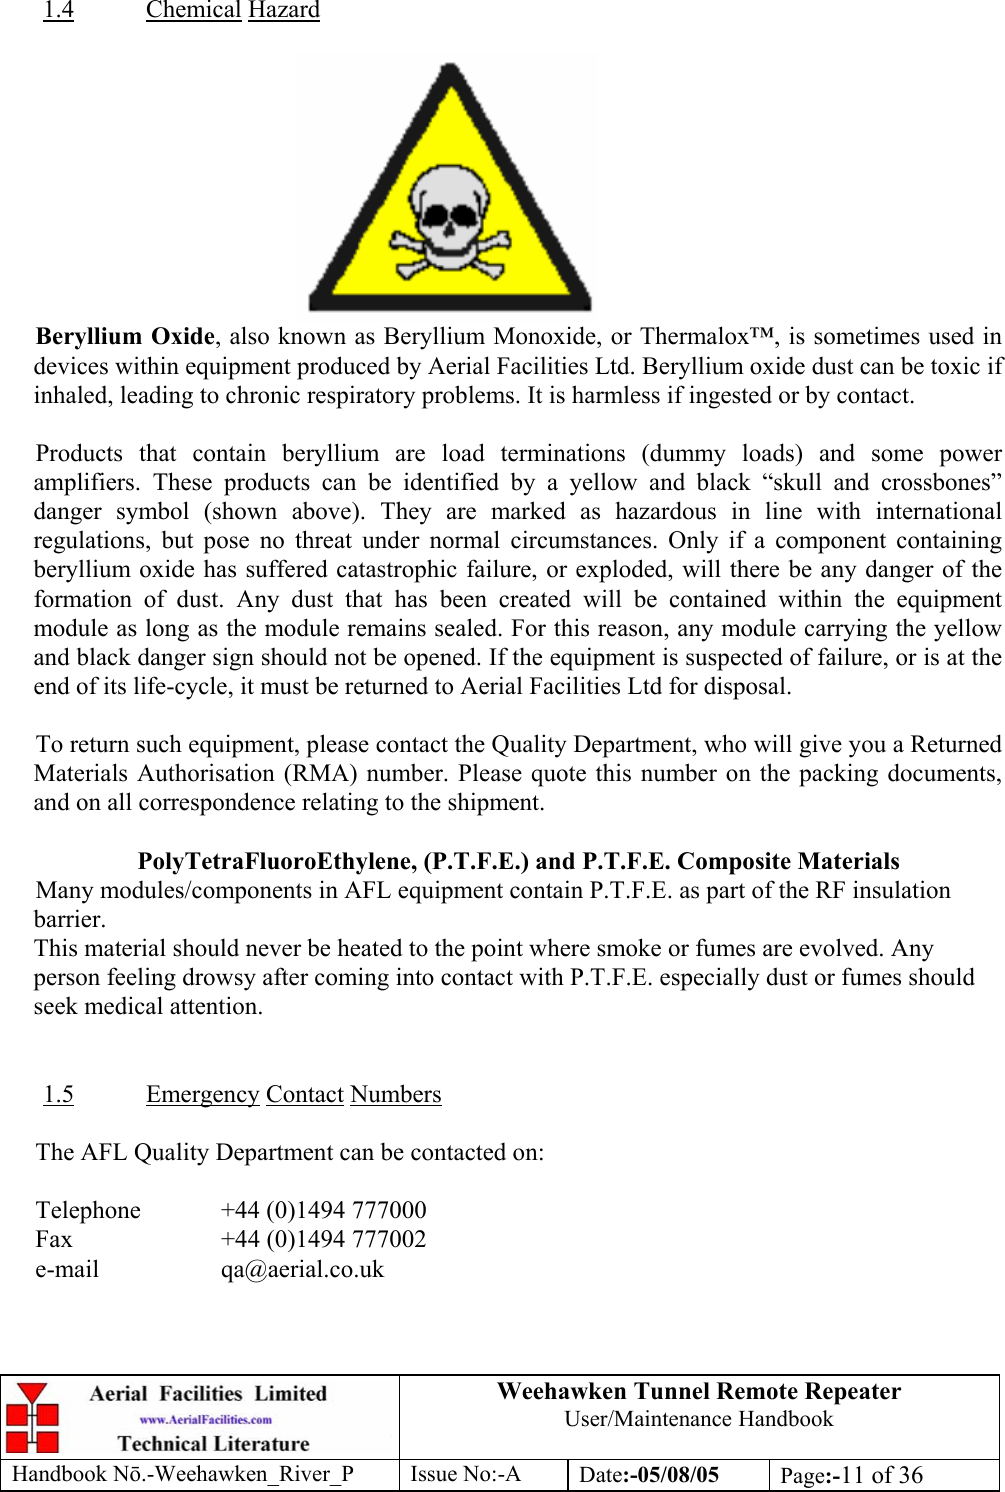 Weehawken Tunnel Remote Repeater User/Maintenance Handbook Handbook Nō.-Weehawken_River_P Issue No:-A Date:-05/08/05  Page:-11 of 36   1.4 Chemical Hazard   Beryllium Oxide, also known as Beryllium Monoxide, or Thermalox™, is sometimes used in devices within equipment produced by Aerial Facilities Ltd. Beryllium oxide dust can be toxic if inhaled, leading to chronic respiratory problems. It is harmless if ingested or by contact.  Products that contain beryllium are load terminations (dummy loads) and some power amplifiers. These products can be identified by a yellow and black “skull and crossbones” danger symbol (shown above). They are marked as hazardous in line with international regulations, but pose no threat under normal circumstances. Only if a component containing beryllium oxide has suffered catastrophic failure, or exploded, will there be any danger of the formation of dust. Any dust that has been created will be contained within the equipment module as long as the module remains sealed. For this reason, any module carrying the yellow and black danger sign should not be opened. If the equipment is suspected of failure, or is at the end of its life-cycle, it must be returned to Aerial Facilities Ltd for disposal.  To return such equipment, please contact the Quality Department, who will give you a Returned Materials Authorisation (RMA) number. Please quote this number on the packing documents, and on all correspondence relating to the shipment.  PolyTetraFluoroEthylene, (P.T.F.E.) and P.T.F.E. Composite Materials Many modules/components in AFL equipment contain P.T.F.E. as part of the RF insulation barrier. This material should never be heated to the point where smoke or fumes are evolved. Any person feeling drowsy after coming into contact with P.T.F.E. especially dust or fumes should seek medical attention.   1.5 Emergency Contact Numbers  The AFL Quality Department can be contacted on:  Telephone   +44 (0)1494 777000 Fax    +44 (0)1494 777002 e-mail   qa@aerial.co.uk  